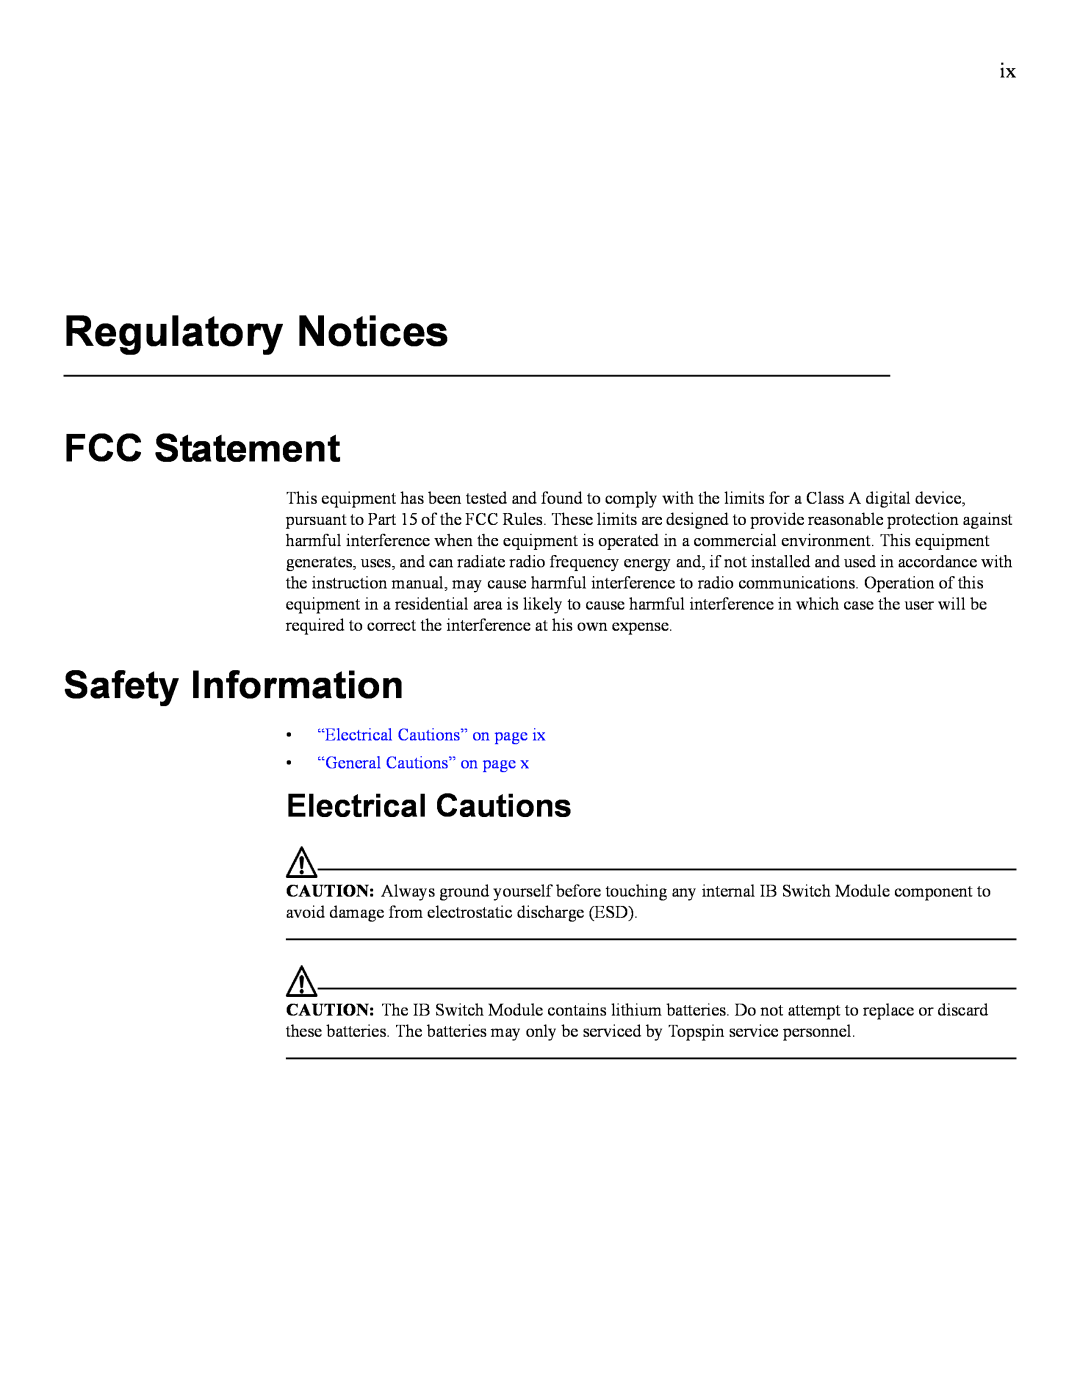 IBM 24R9718 IB manual Regulatory Notices, FCC Statement, Safety Information, Electrical Cautions 